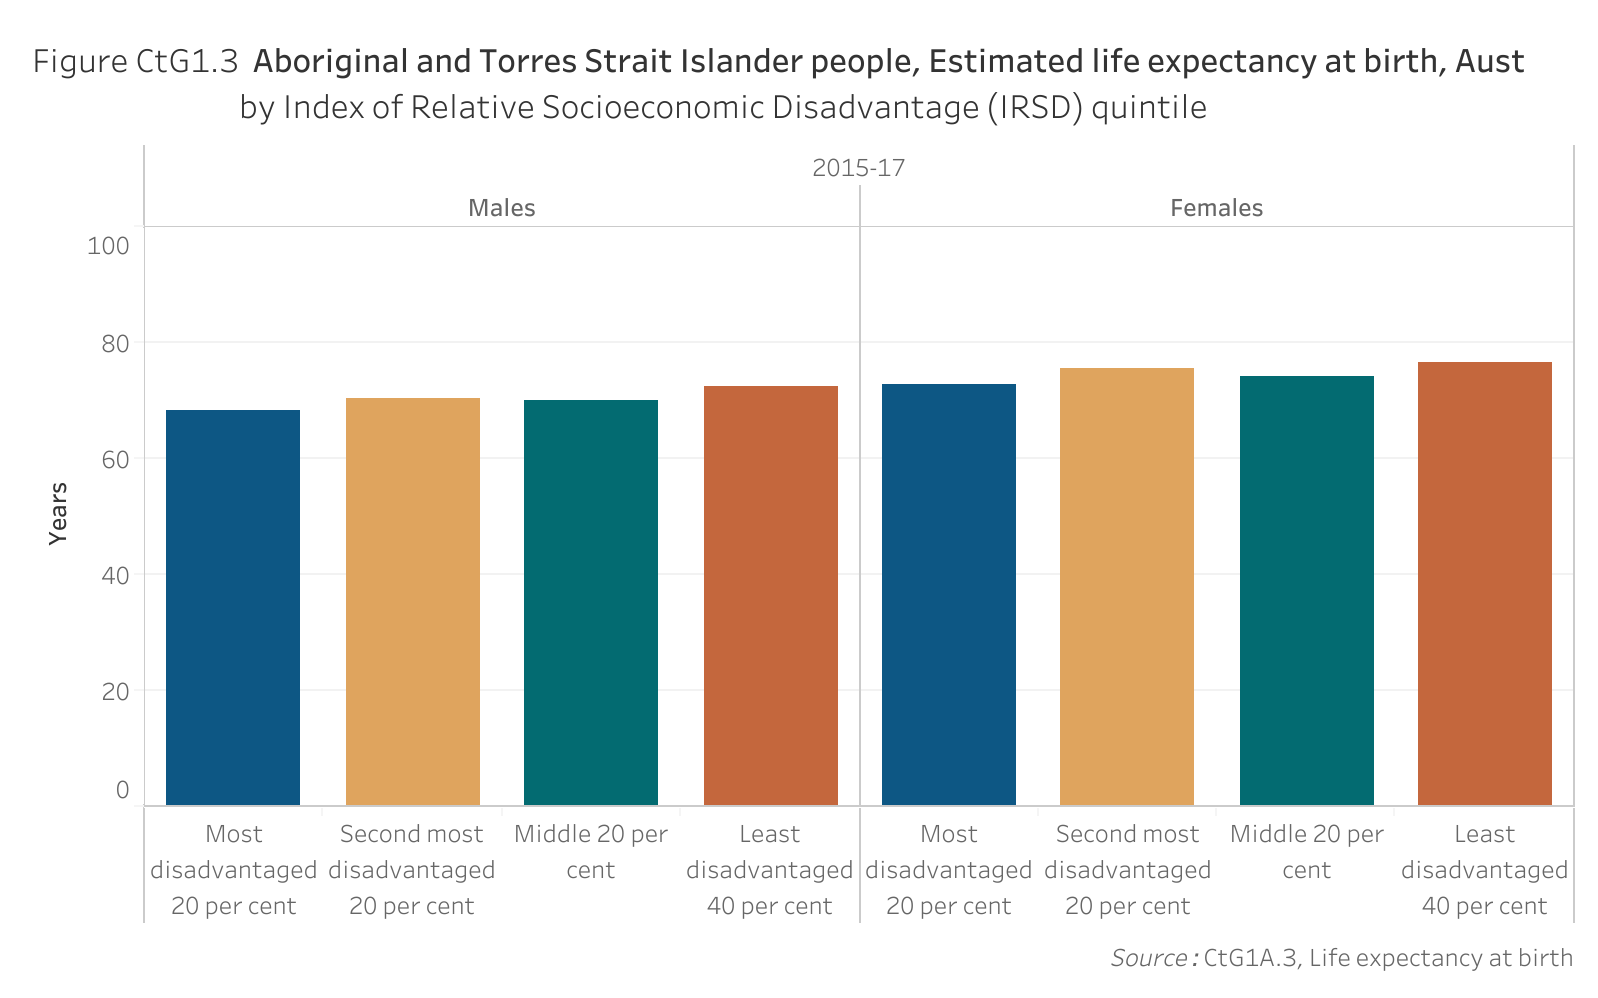 Figure CtG1.3 shows Aboriginal and Torres Strait Islander people, Estimated life expectancy at birth, Australia, by Index of Relative Socioeconomic Disadvantage quintile. More details can be found within the text near this image.